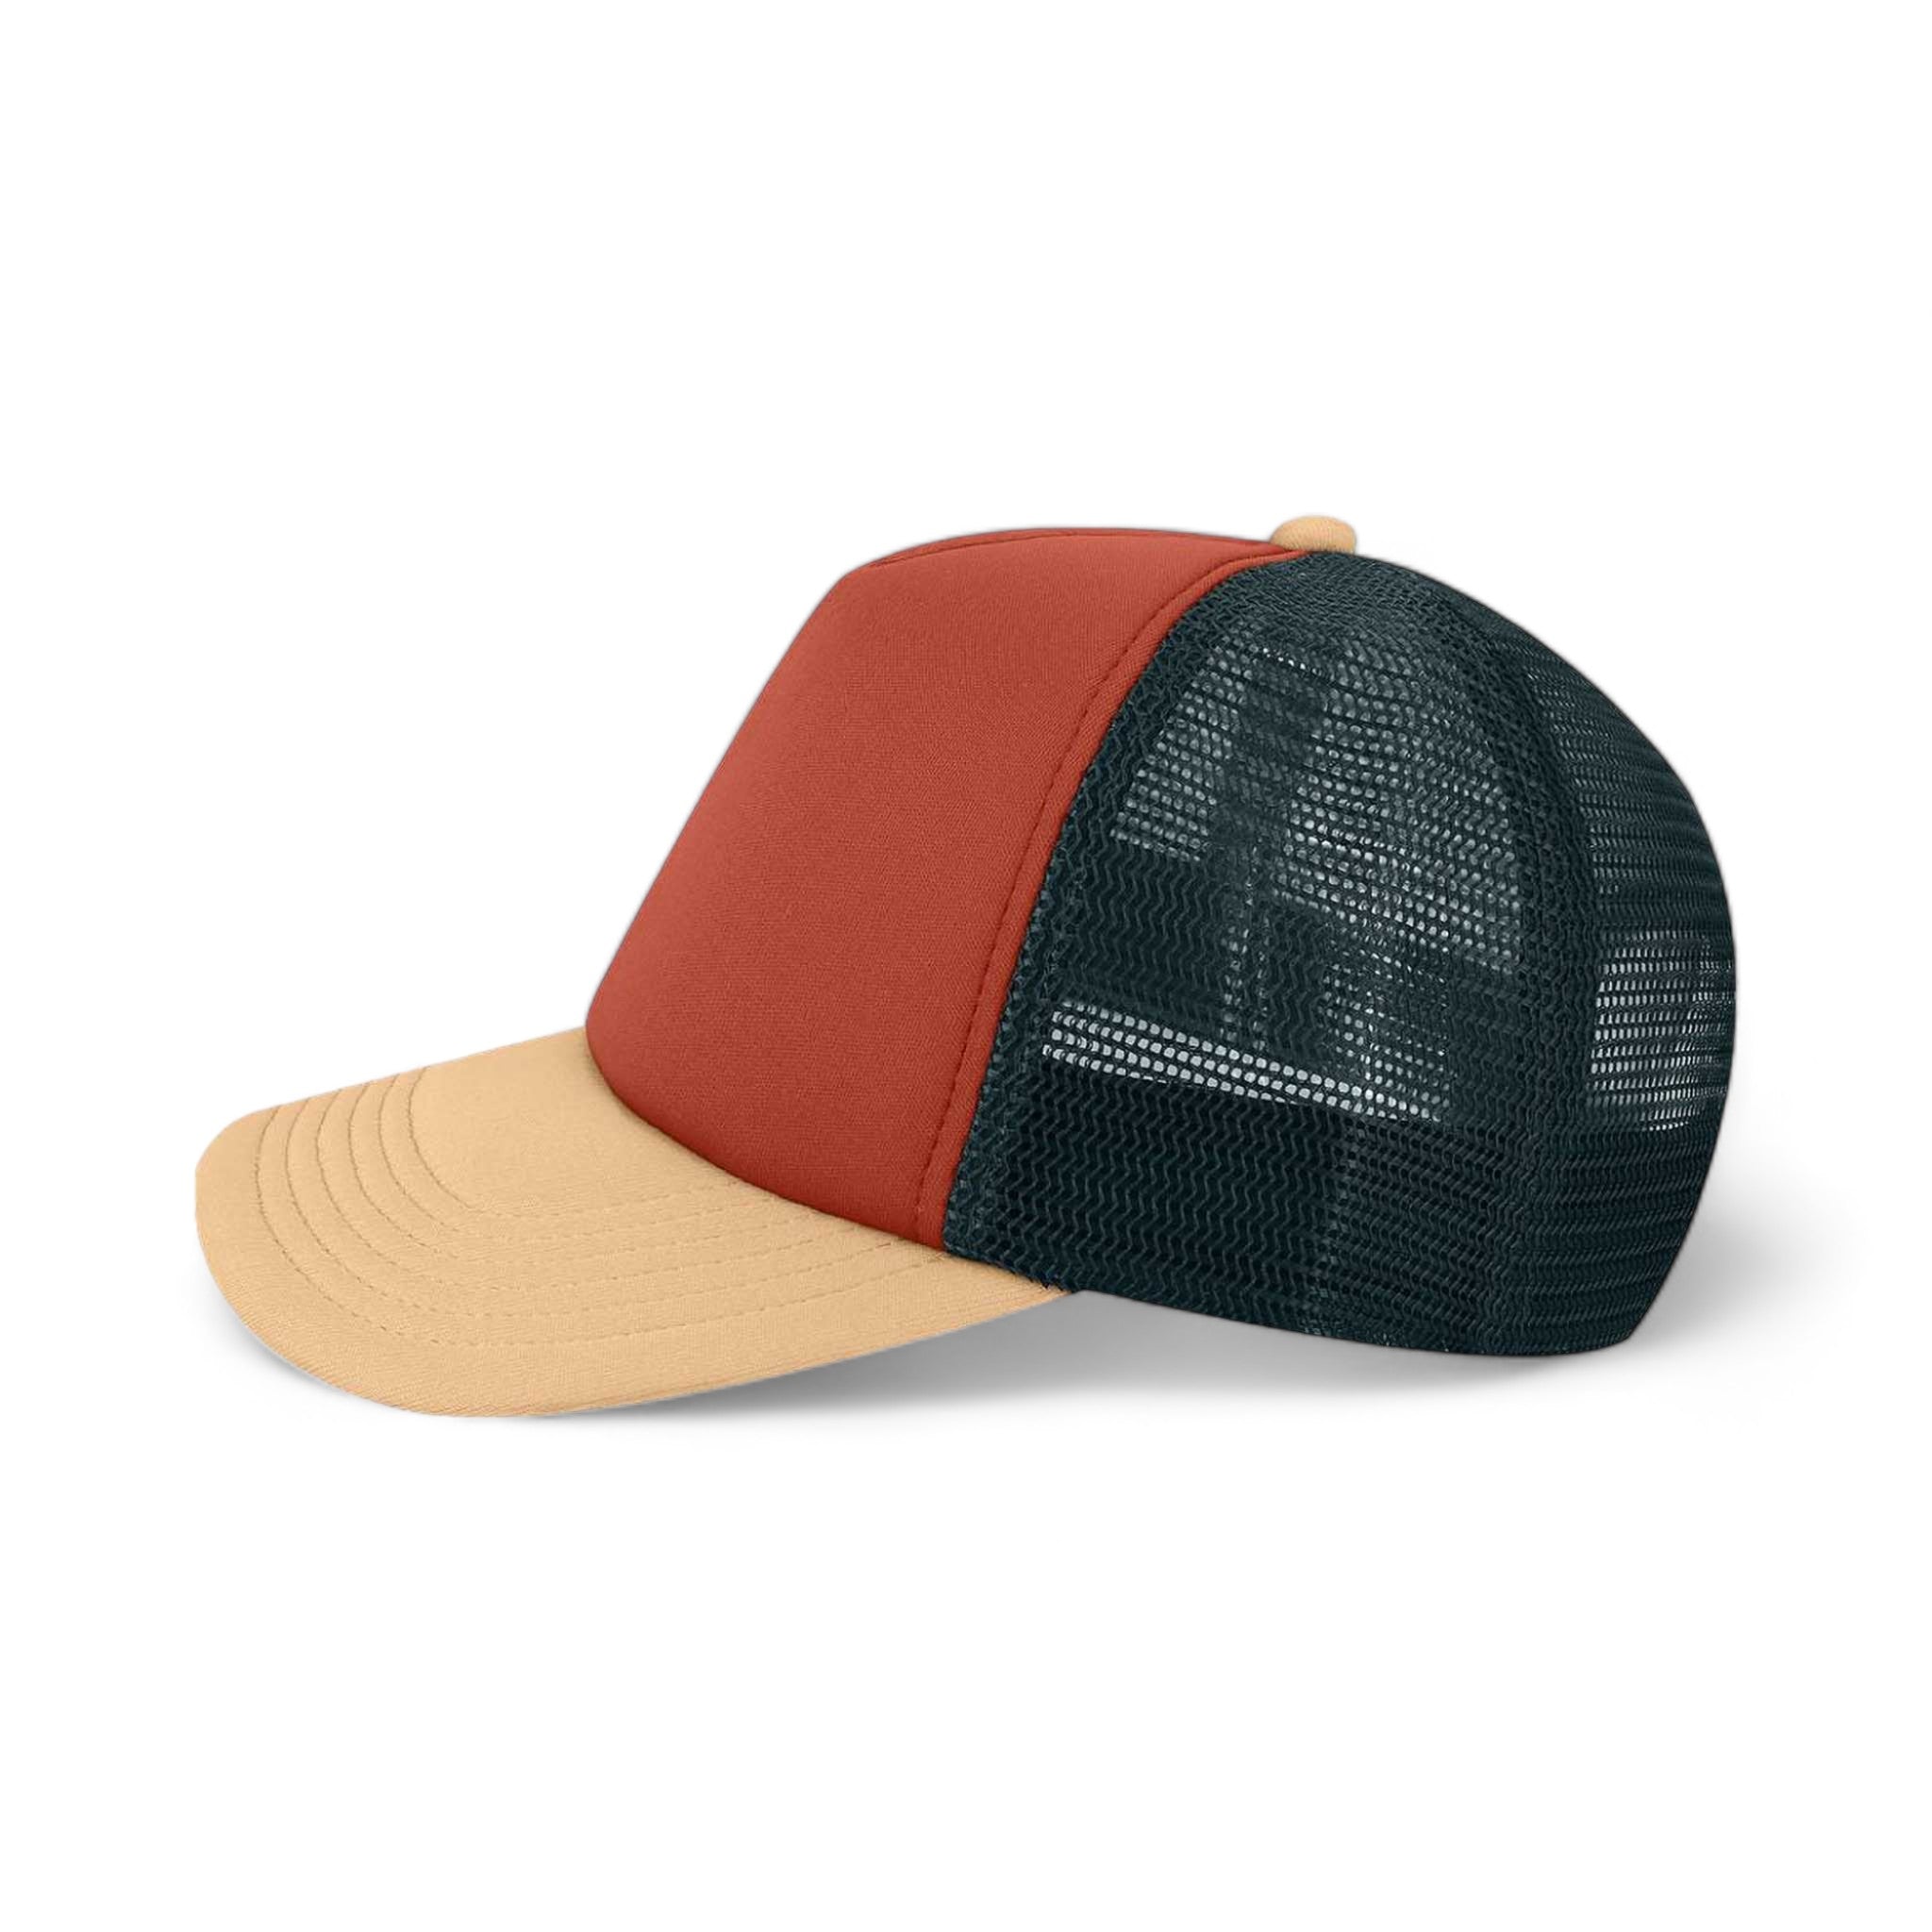 Side view of LEGACY LTA custom hat in sienna, wheat and navy